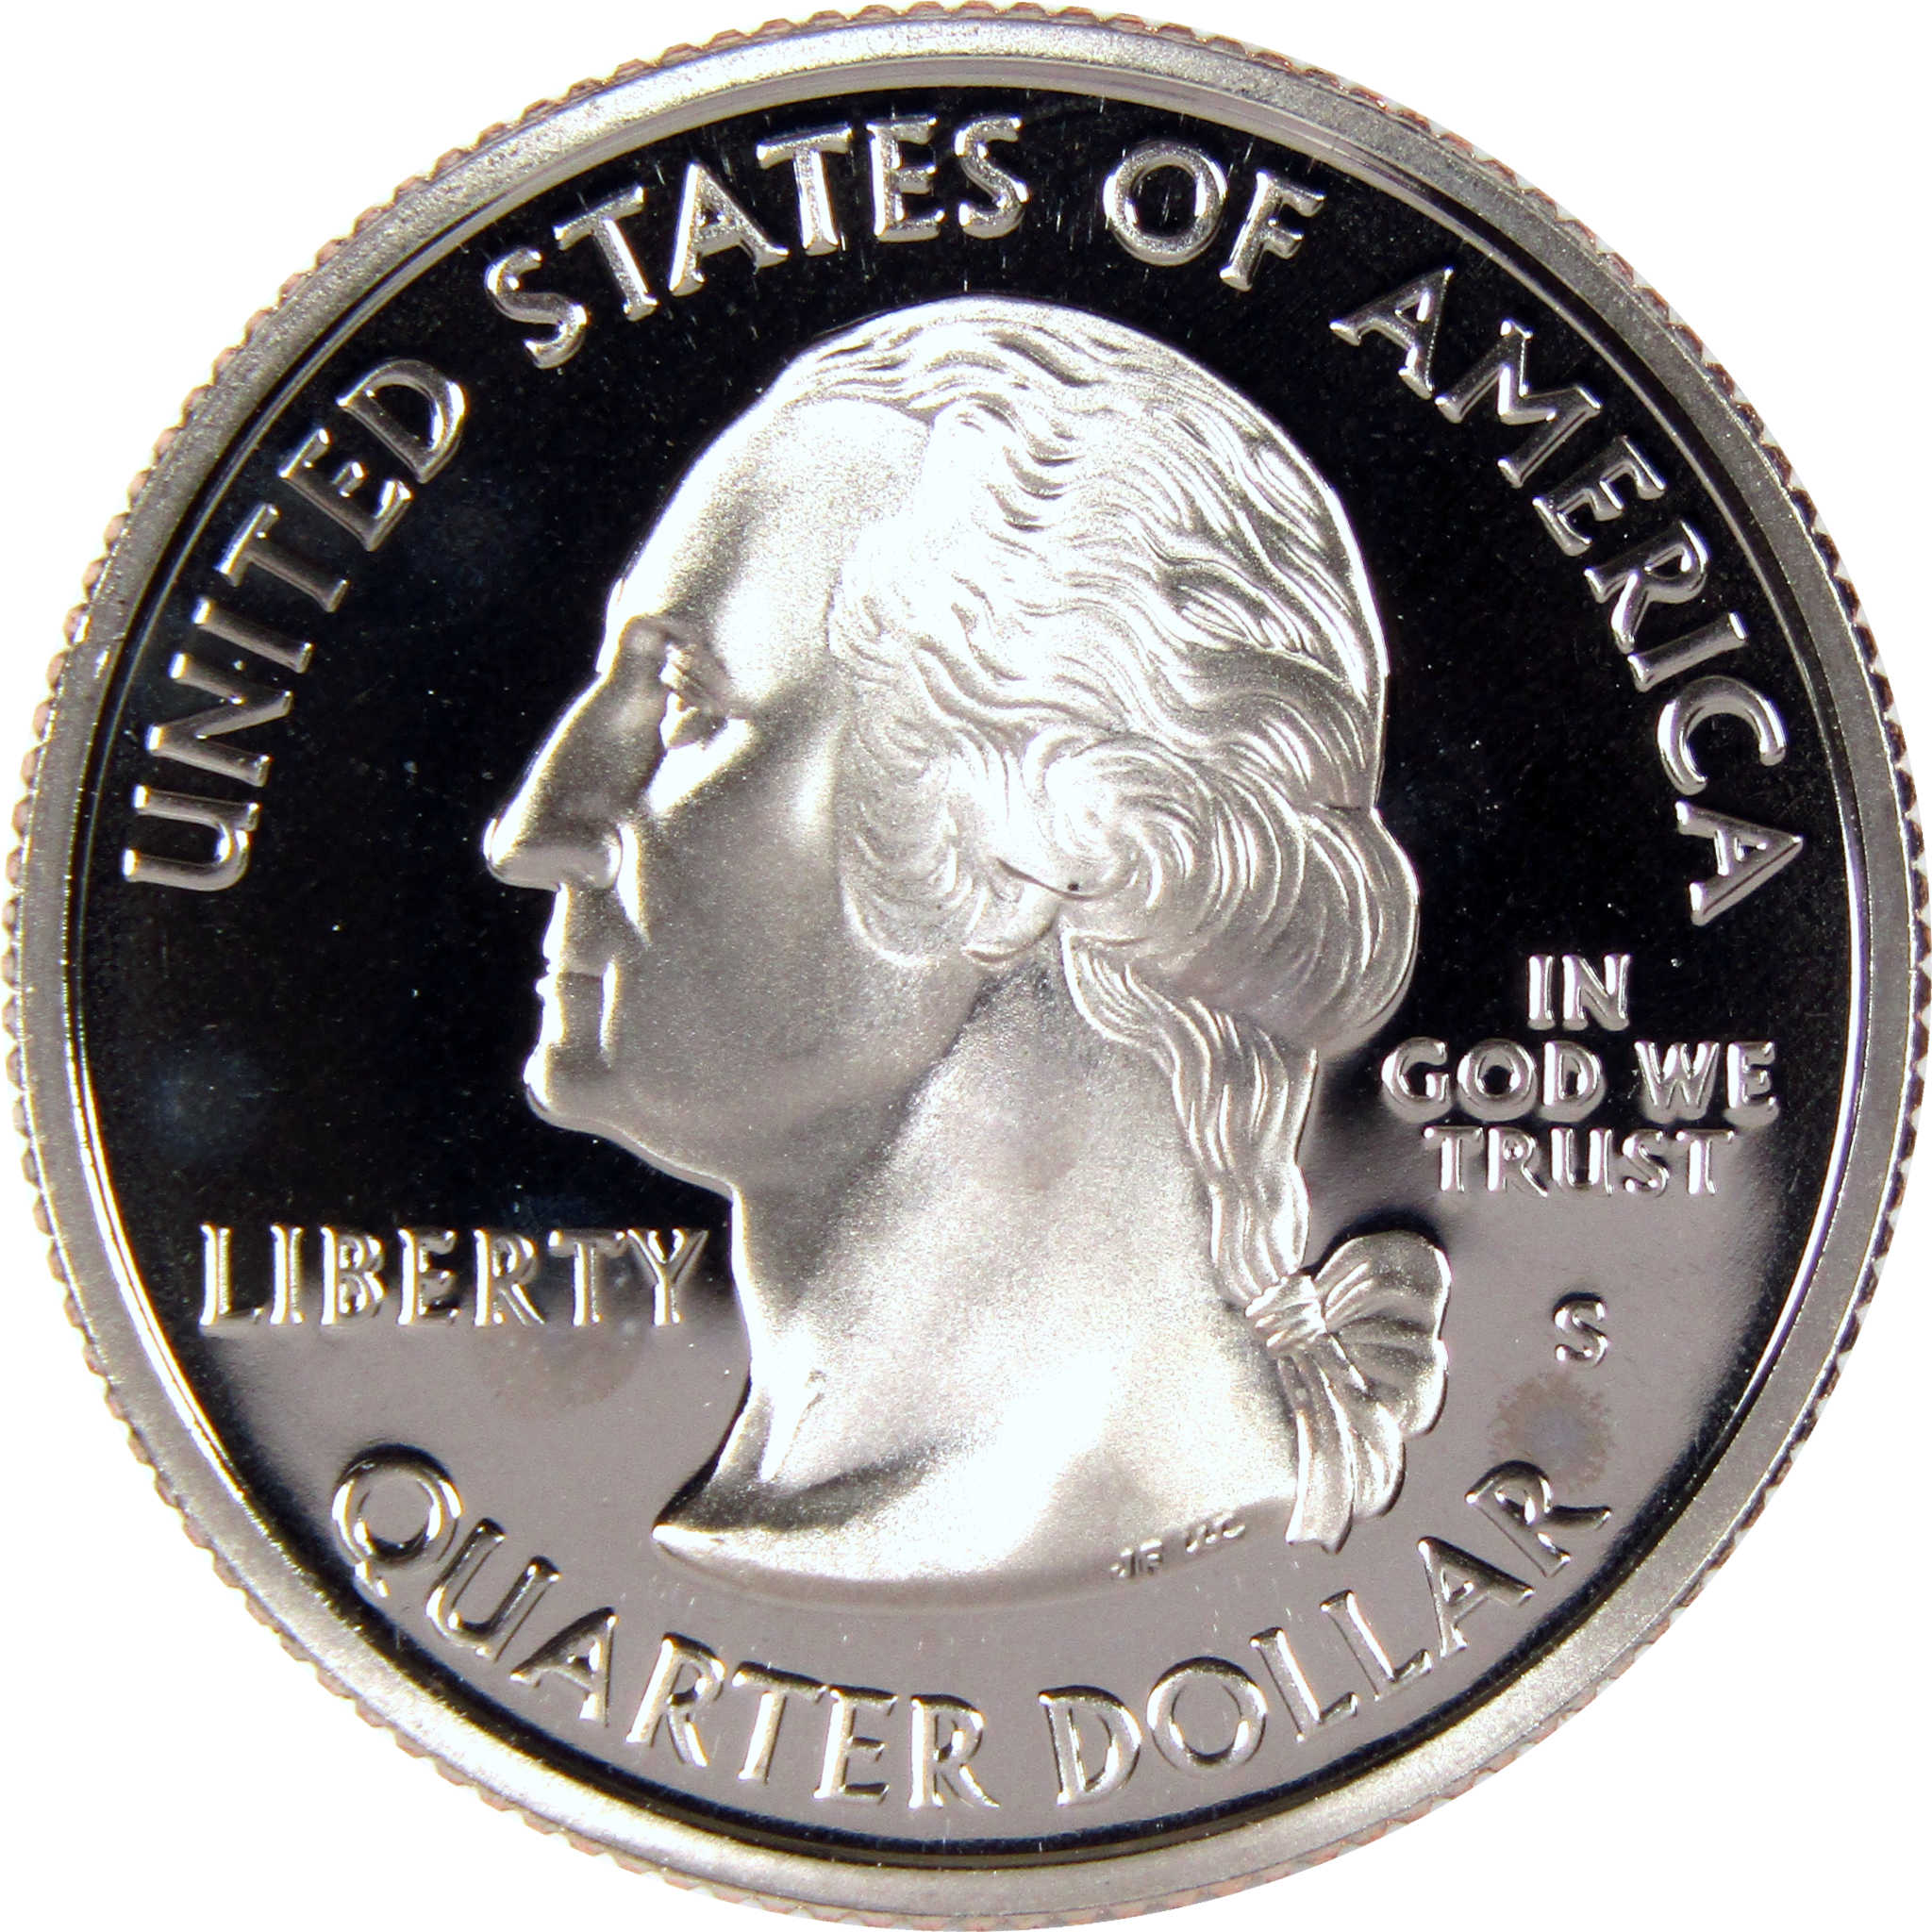 2006 S Nevada State Quarter Clad 25c Proof Coin